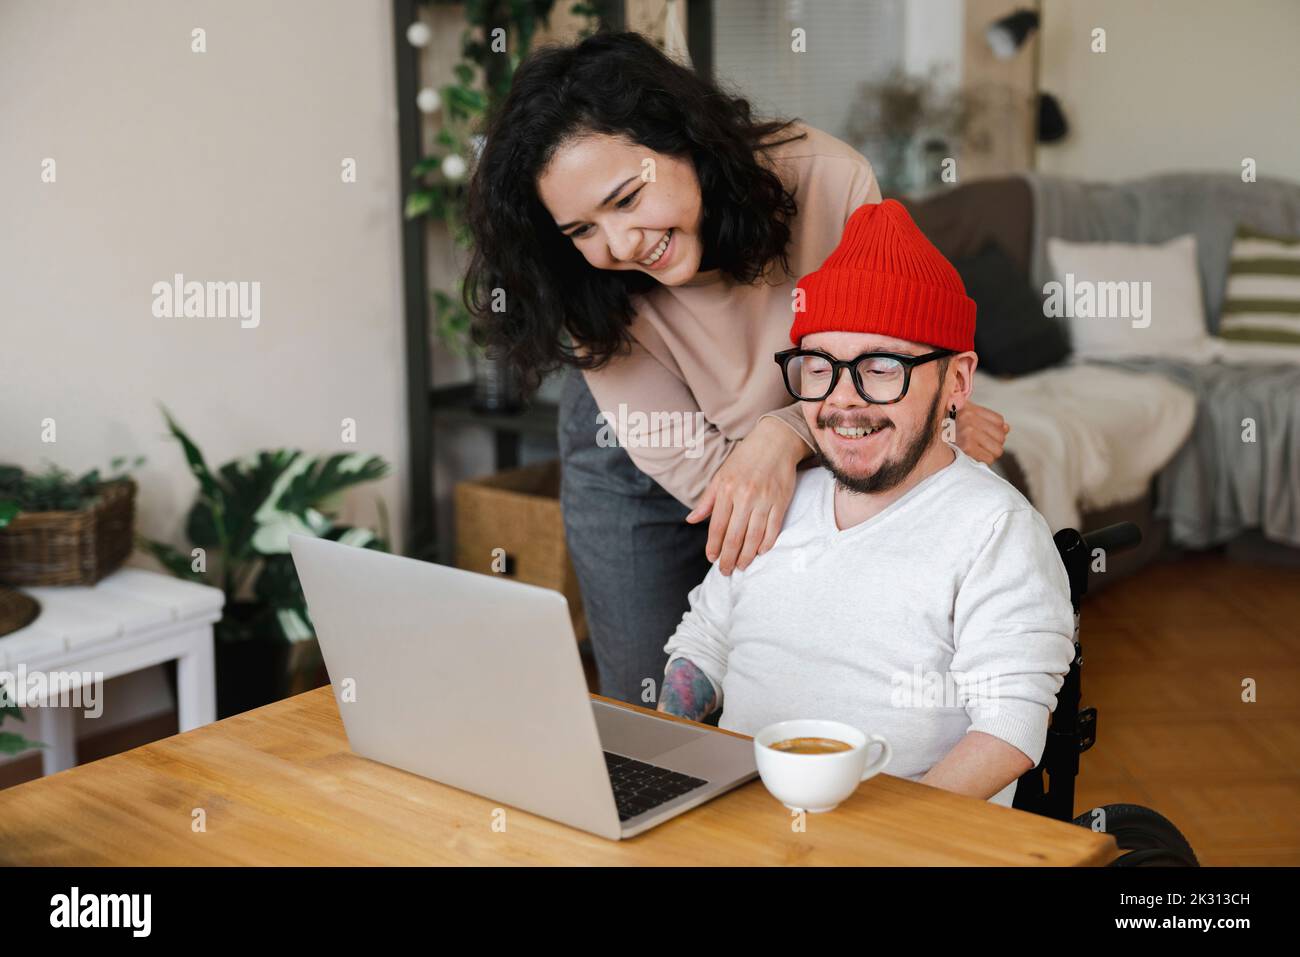 Smiling woman standing by boyfriend in wheelchair looking at laptop Stock Photo